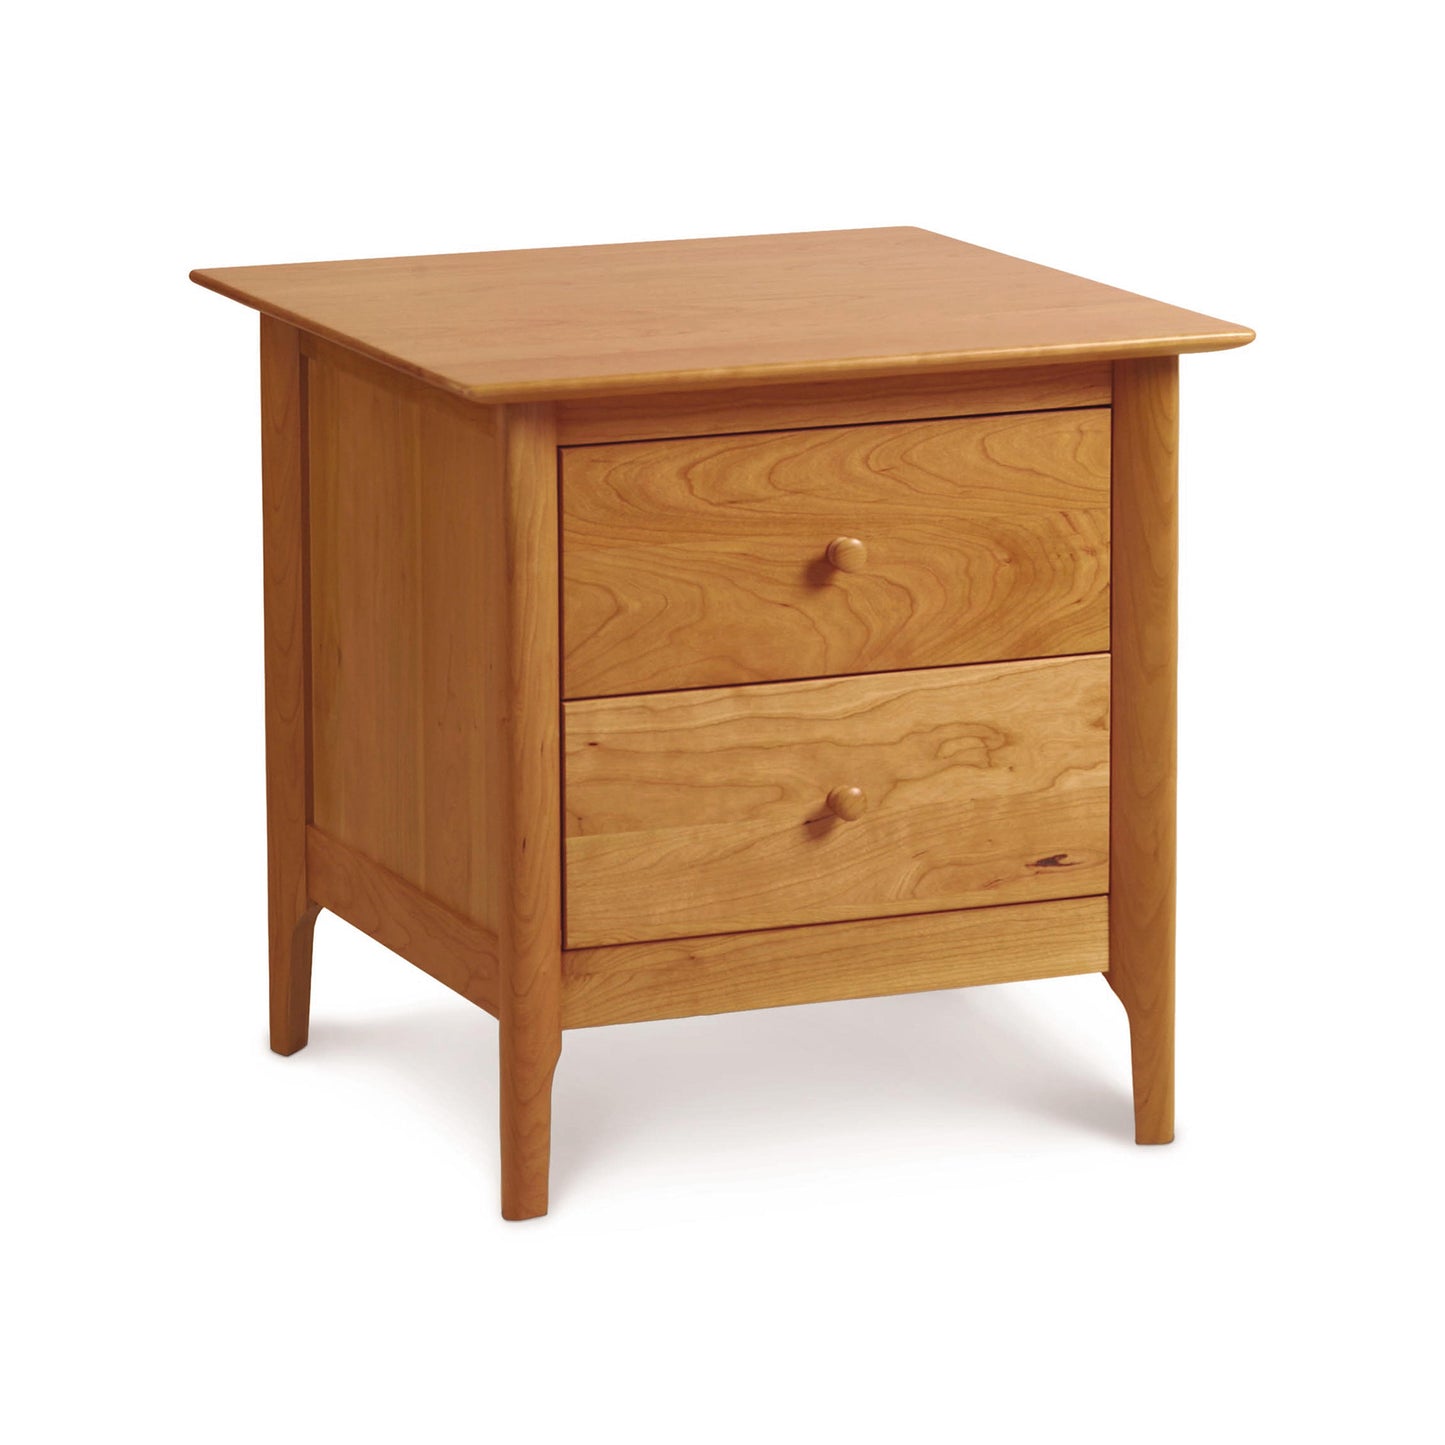 The Sarah 2-Drawer Nightstand, part of the Shaker-style Copeland Furniture Collection, is a small wooden nightstand handmade in Vermont.